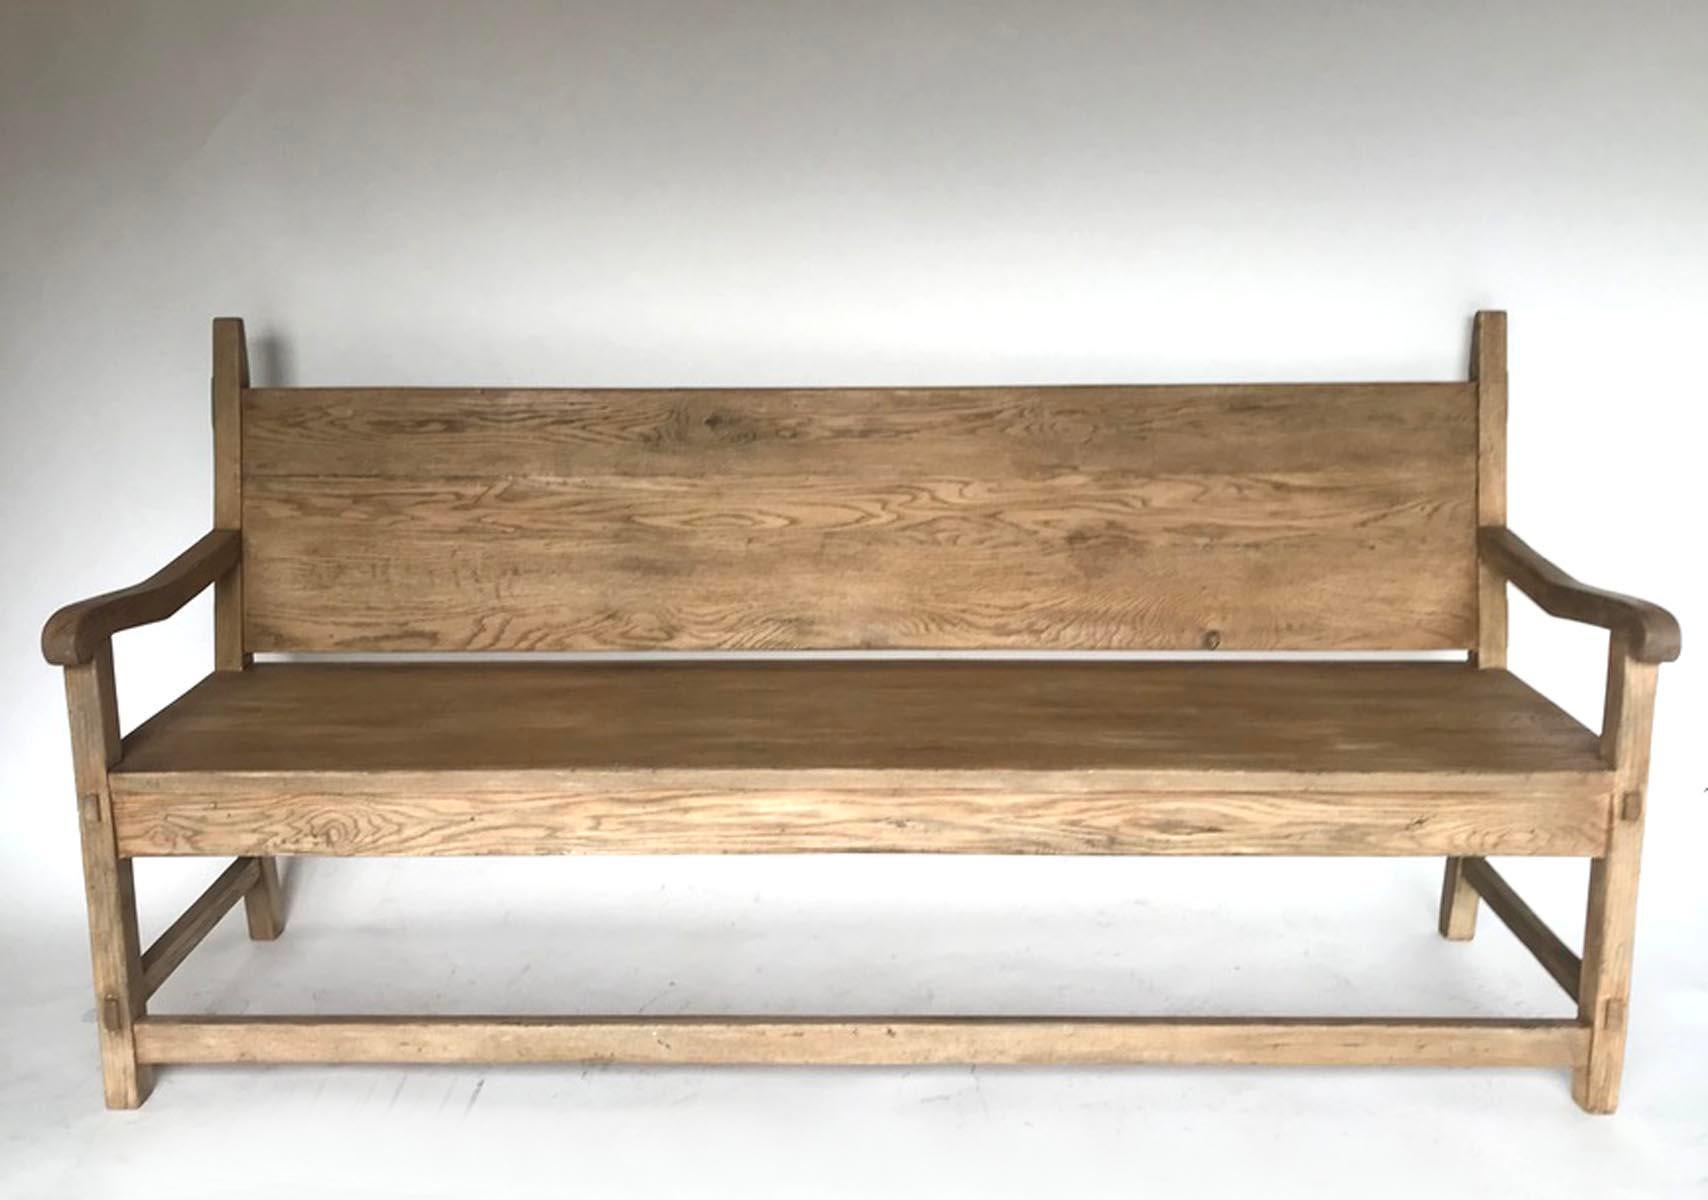 This is one of our custom benches that can be made in walnut or oak. As shown in oak with a distressed natural, weathered looking finish. This can be made in custom lengths and it can also be made deeper to be used as a daybed. This particular one